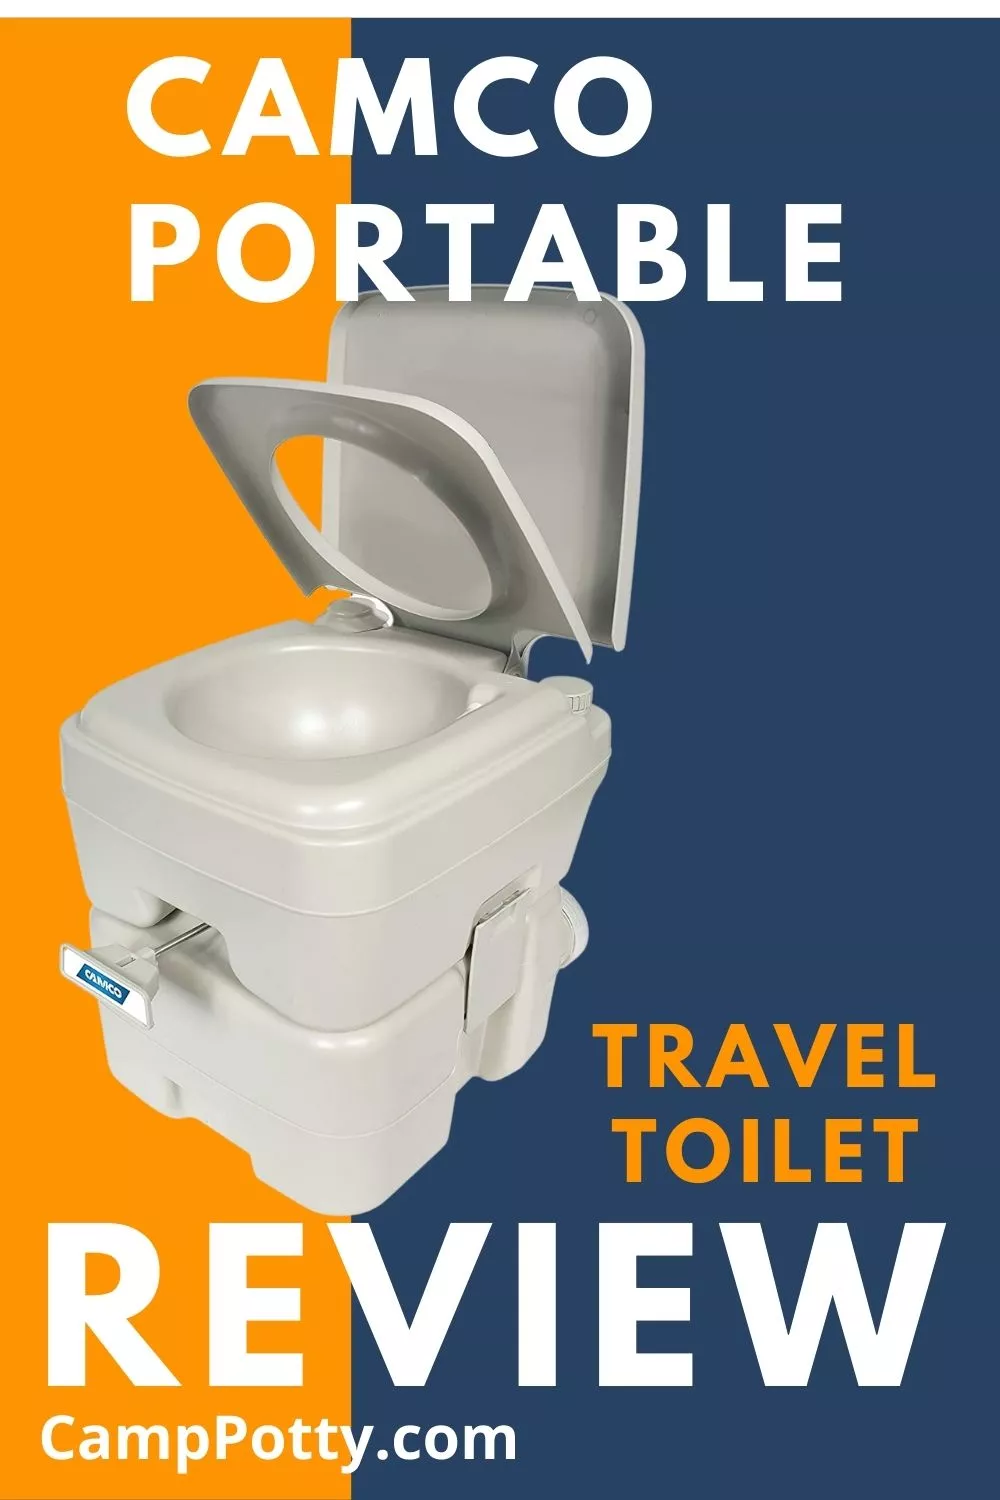 An in-depth review of the Camco Portable Travel Toilet. pros and cons of the product, how it is used and who is it for.